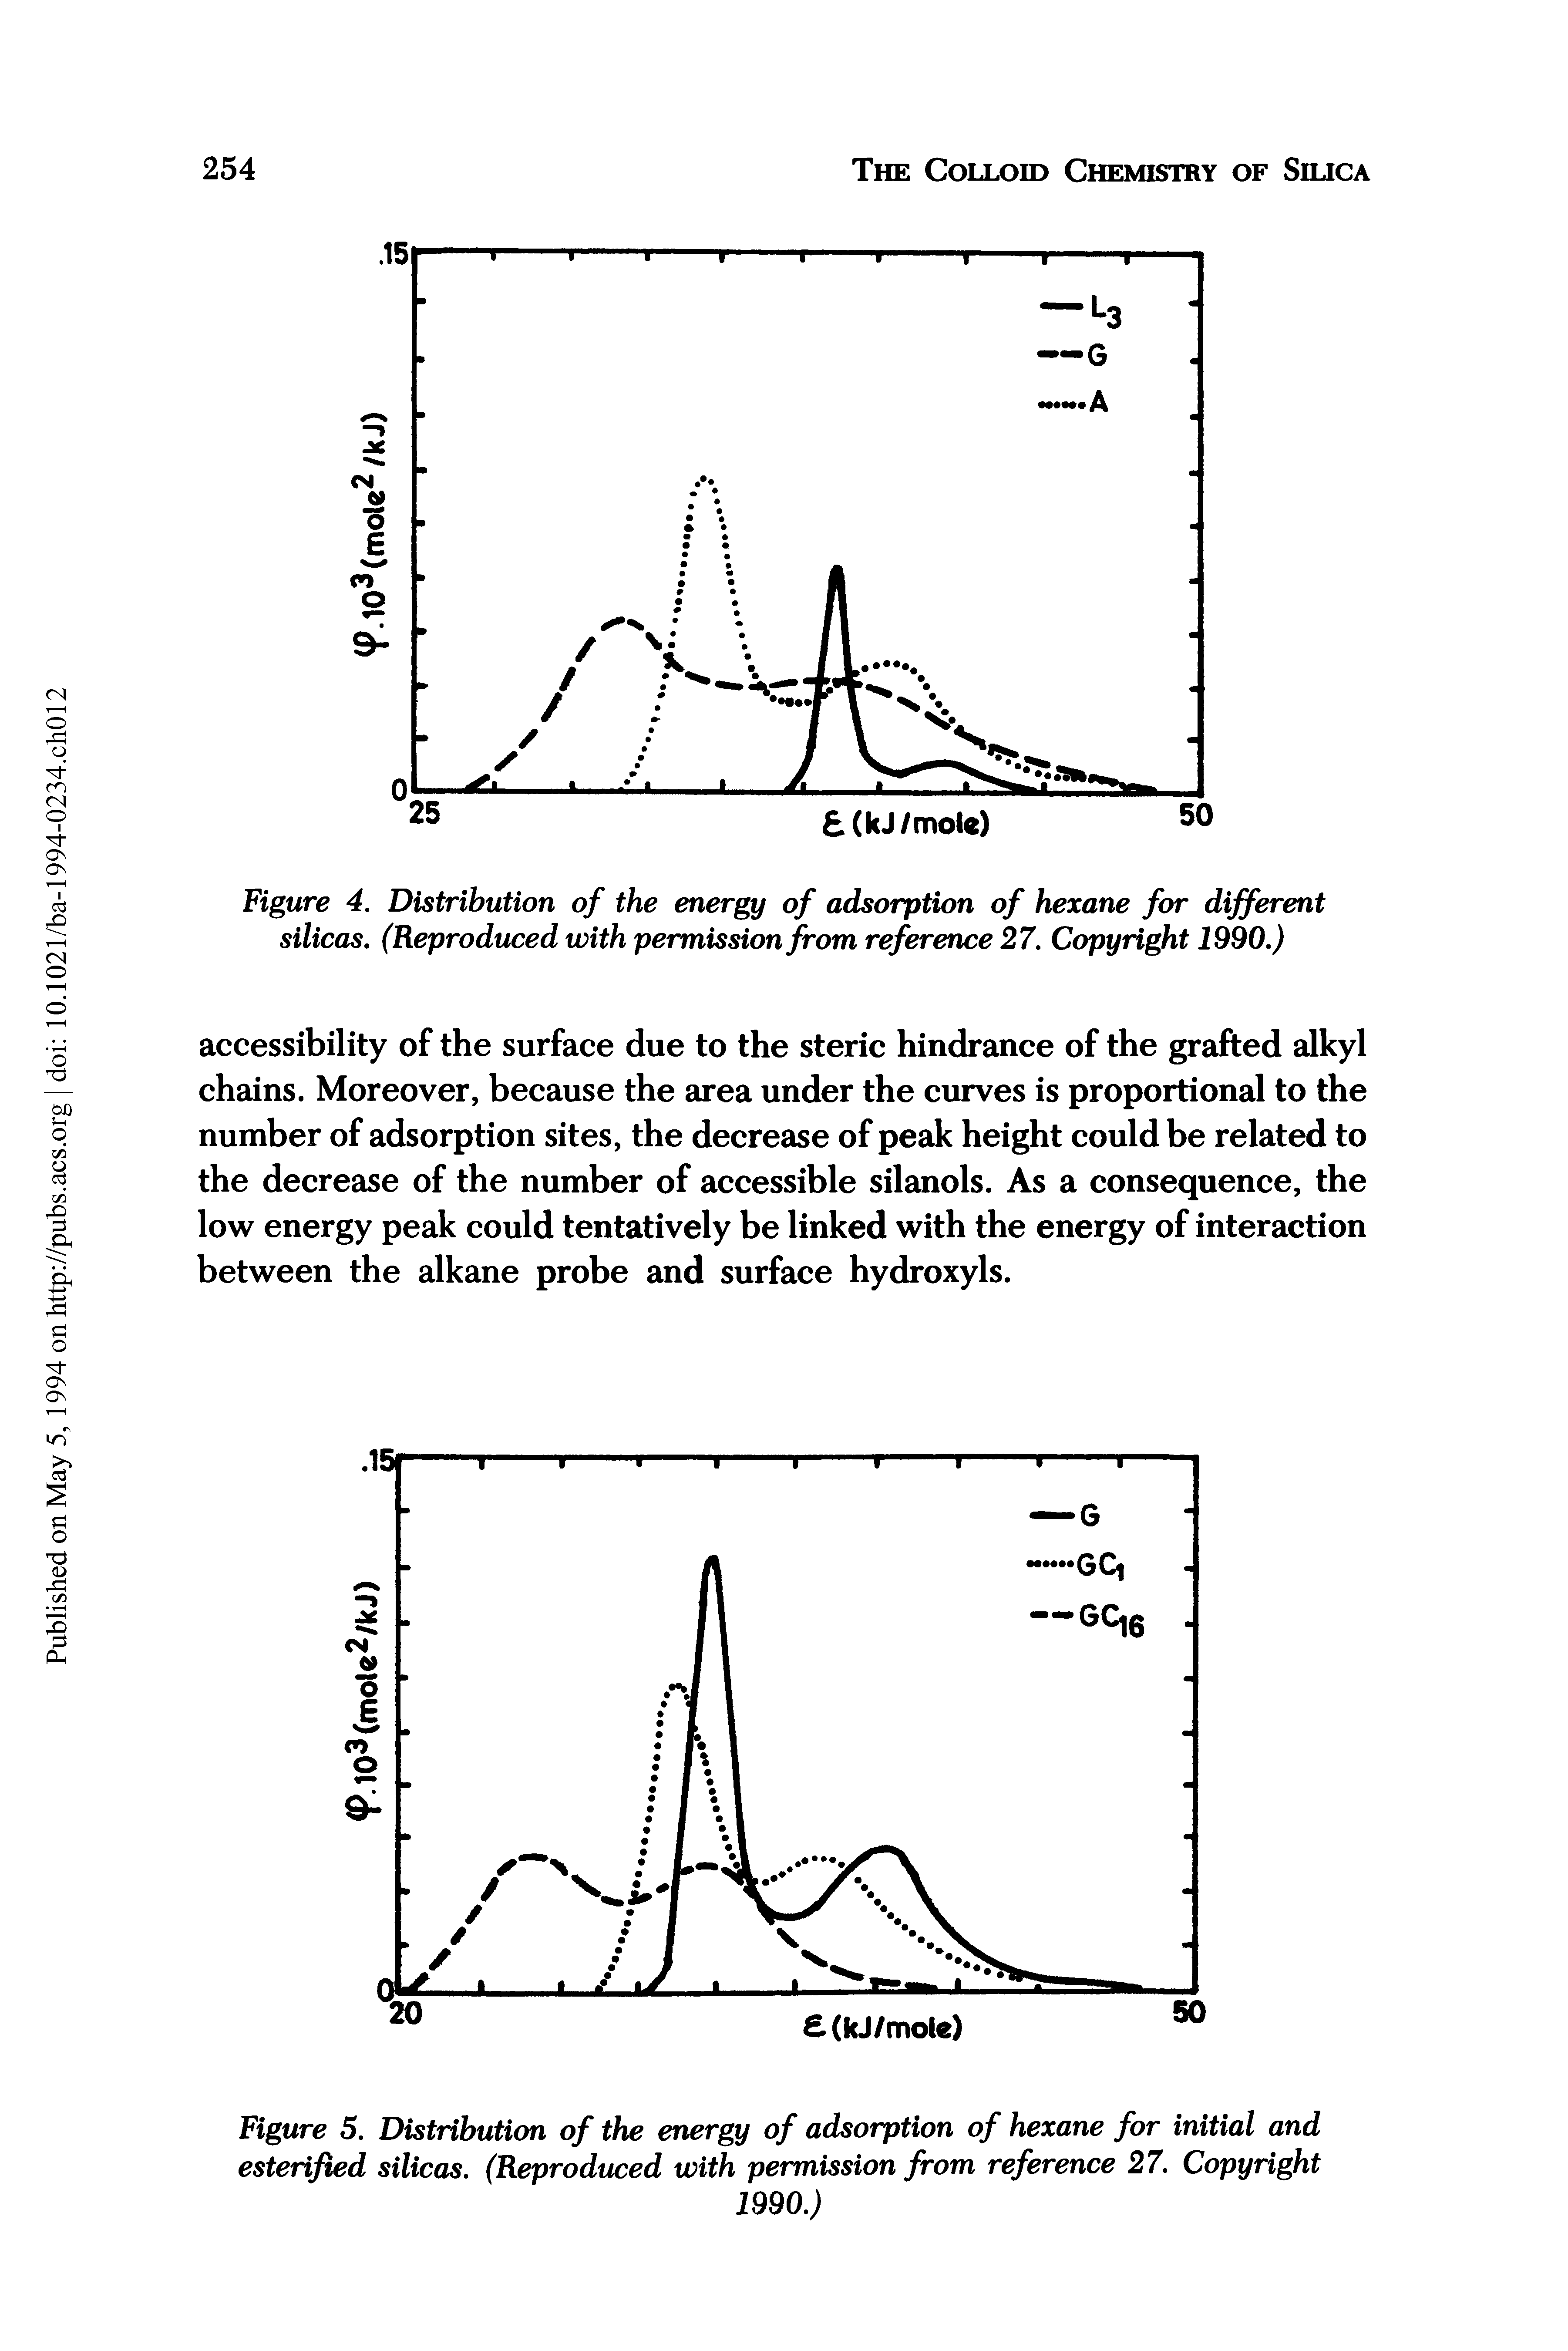 Figure 4. Distribution of the energy of adsorption of hexane for different silicas. (Reproduced with permission from reference 27. Copyright 1990.)...